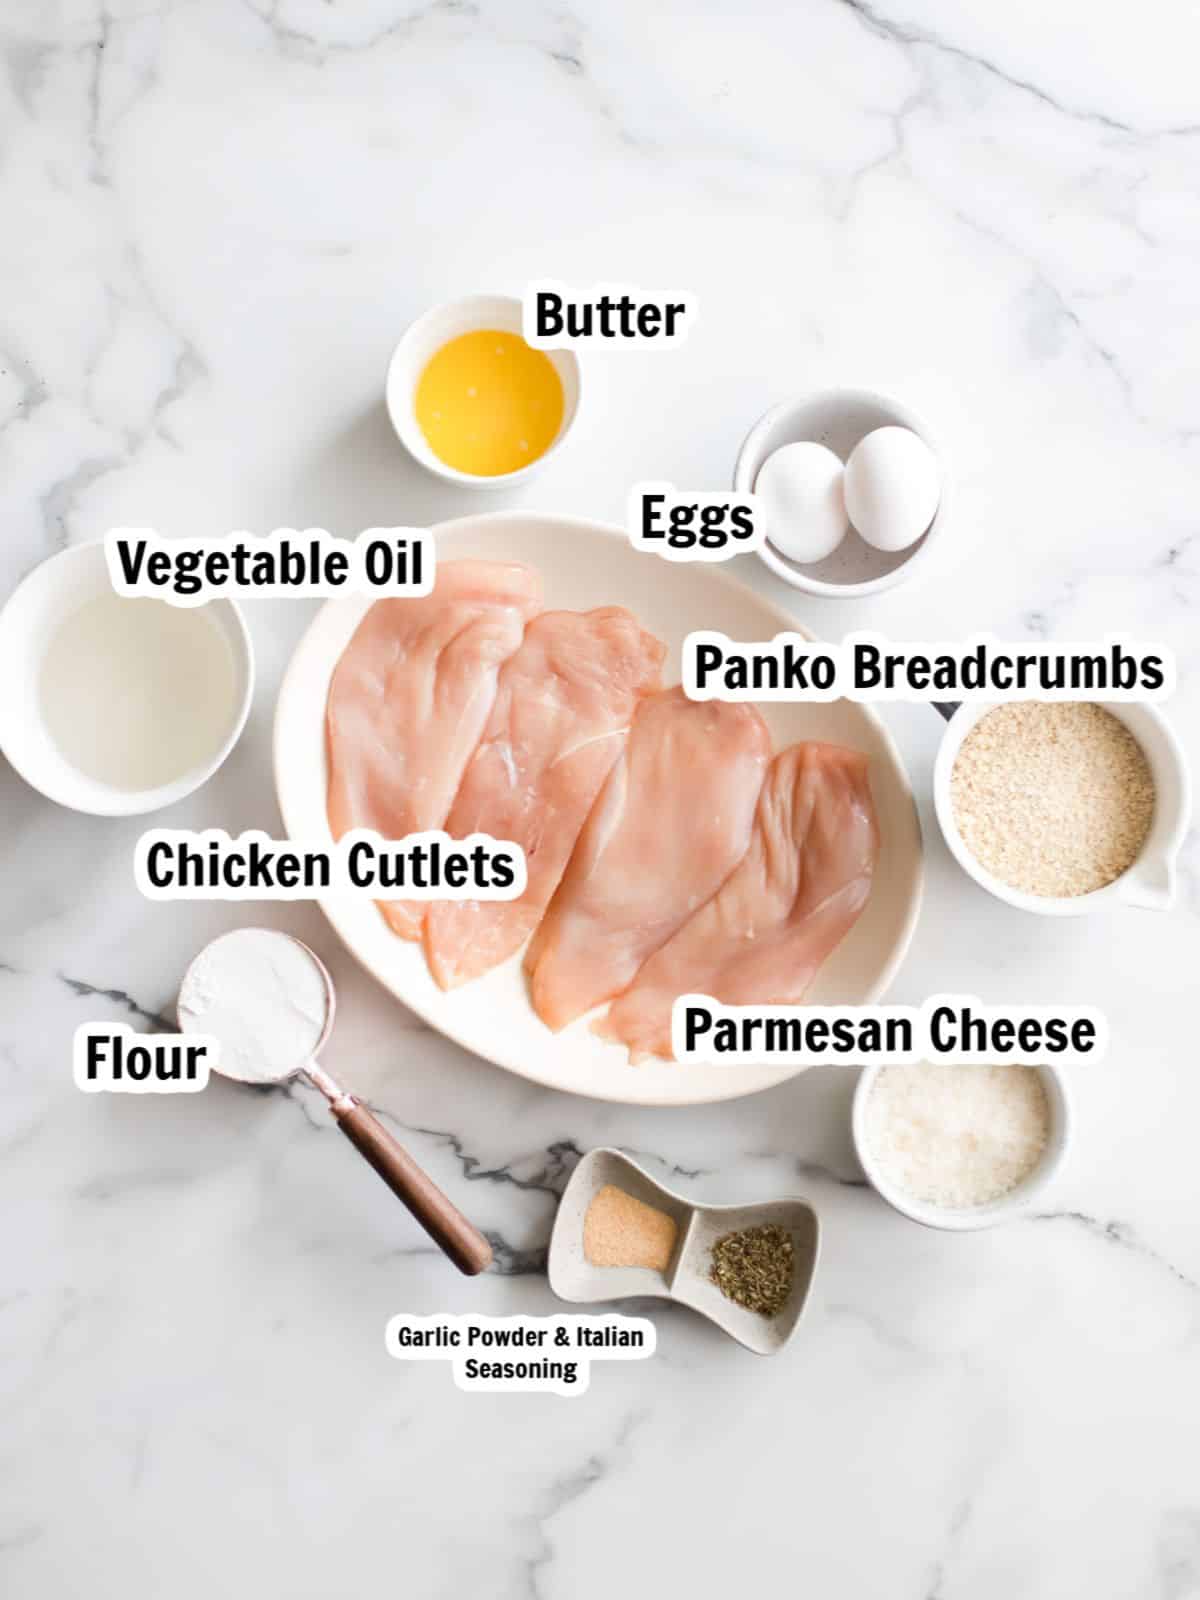 Ingredients for Italian Chicken Cutlets.